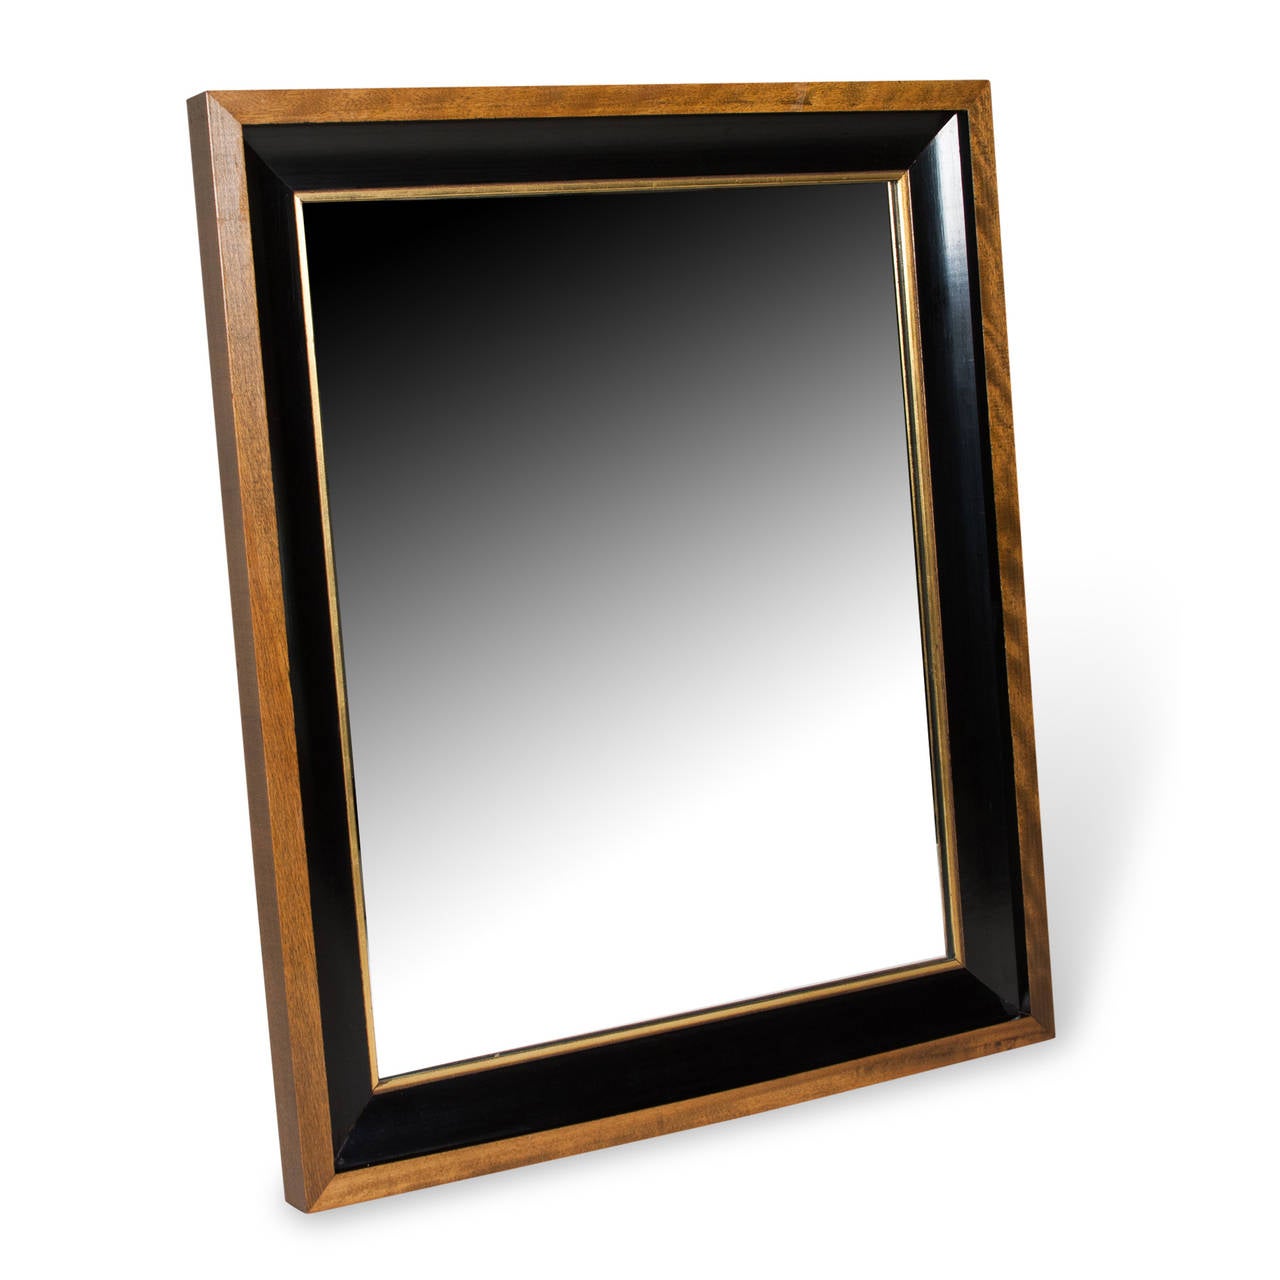 Mahogany and Ebonized Frame Mirror, American, 1960s For Sale 1